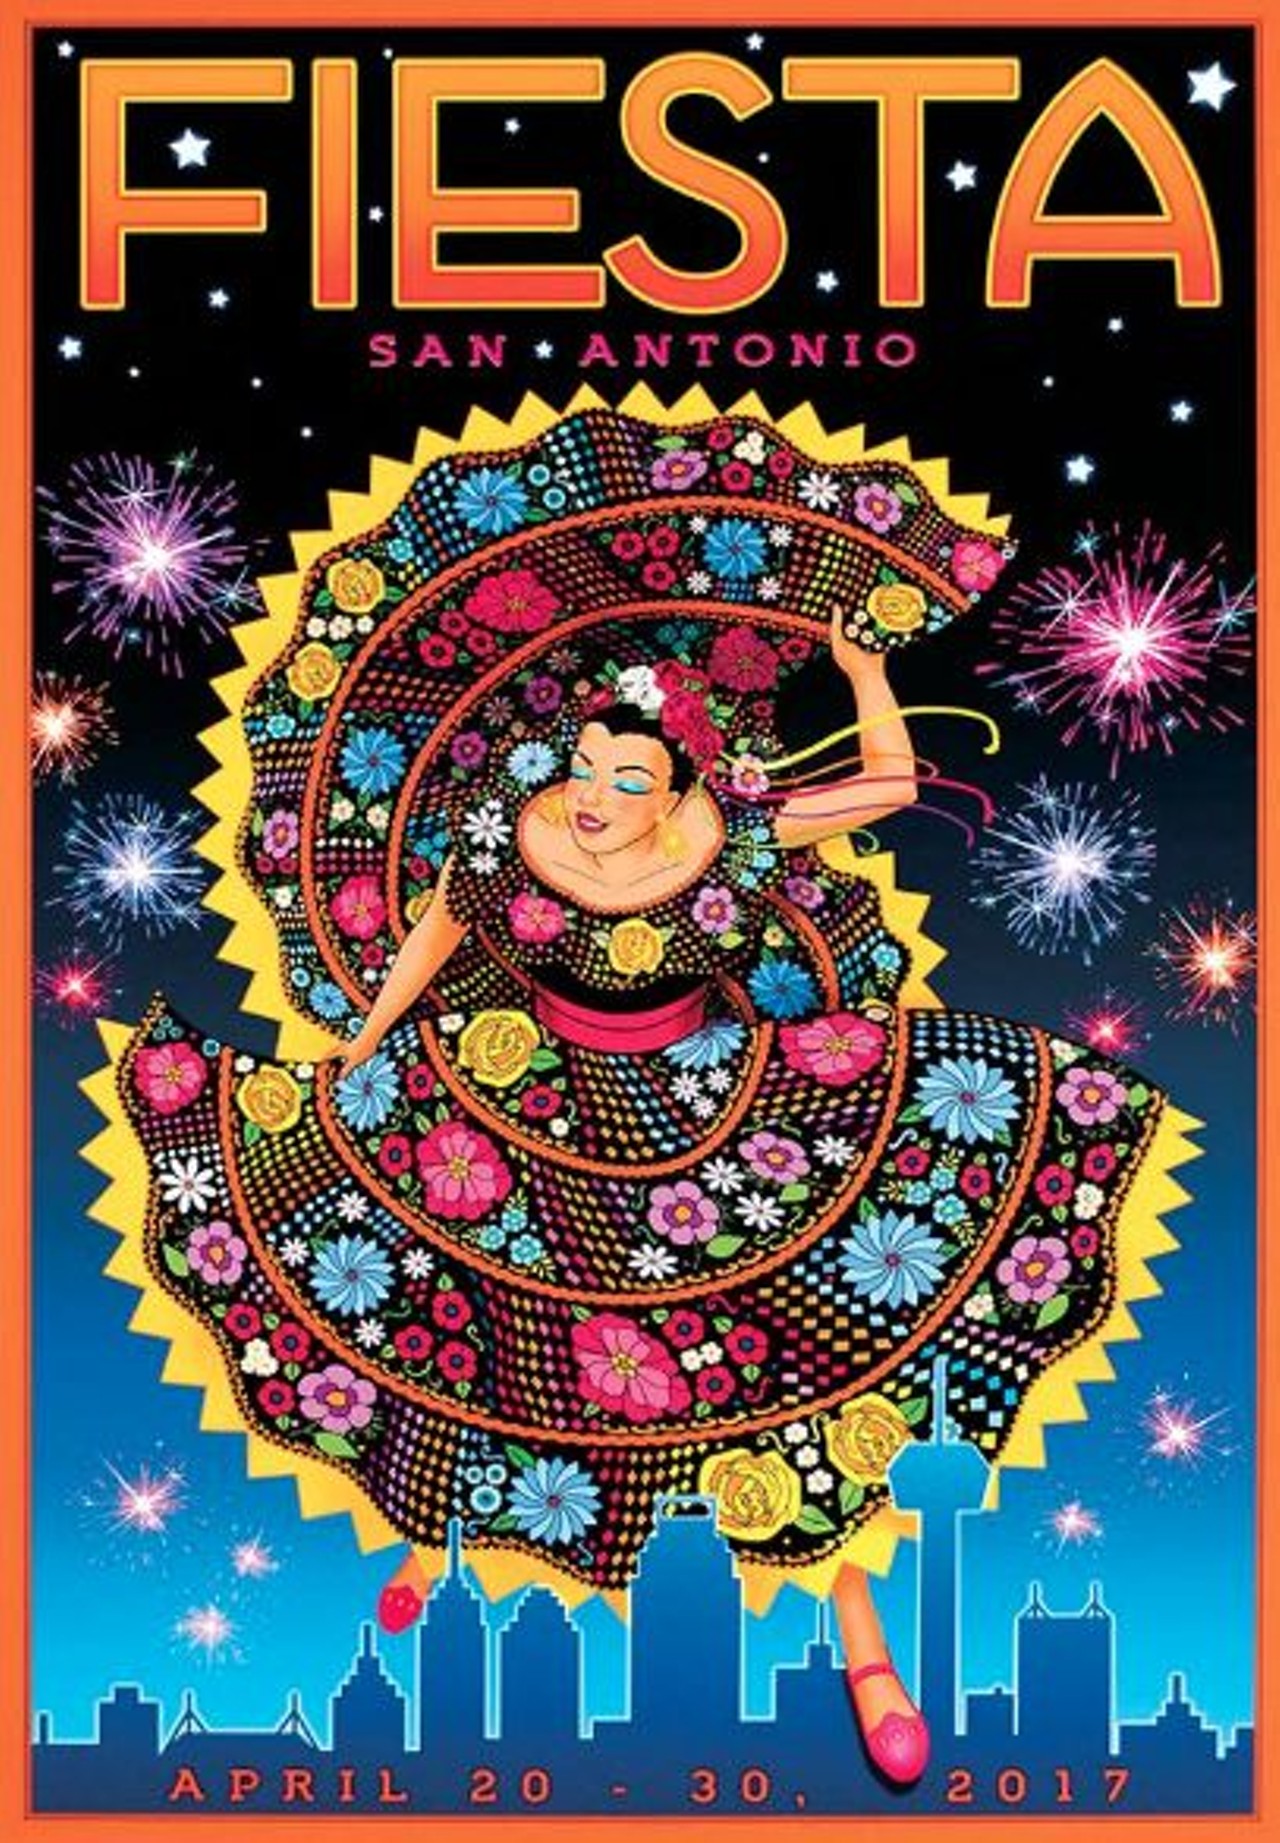 Fiesta Store Pop-up Shop
5-9 p.m. April 20 at Hemisfair Park, 434 S. Alamo 
With the first night of Fiesta comes the pop-up shop. Find the most fun and authentic Fiesta-wear to make your outfits for the city&#146;s 10-day party. That includes official Fiesta t-shirts and medals, of course. Get this year&#146;s Fiesta poster, too.
Official 2017 Fiesta Poster